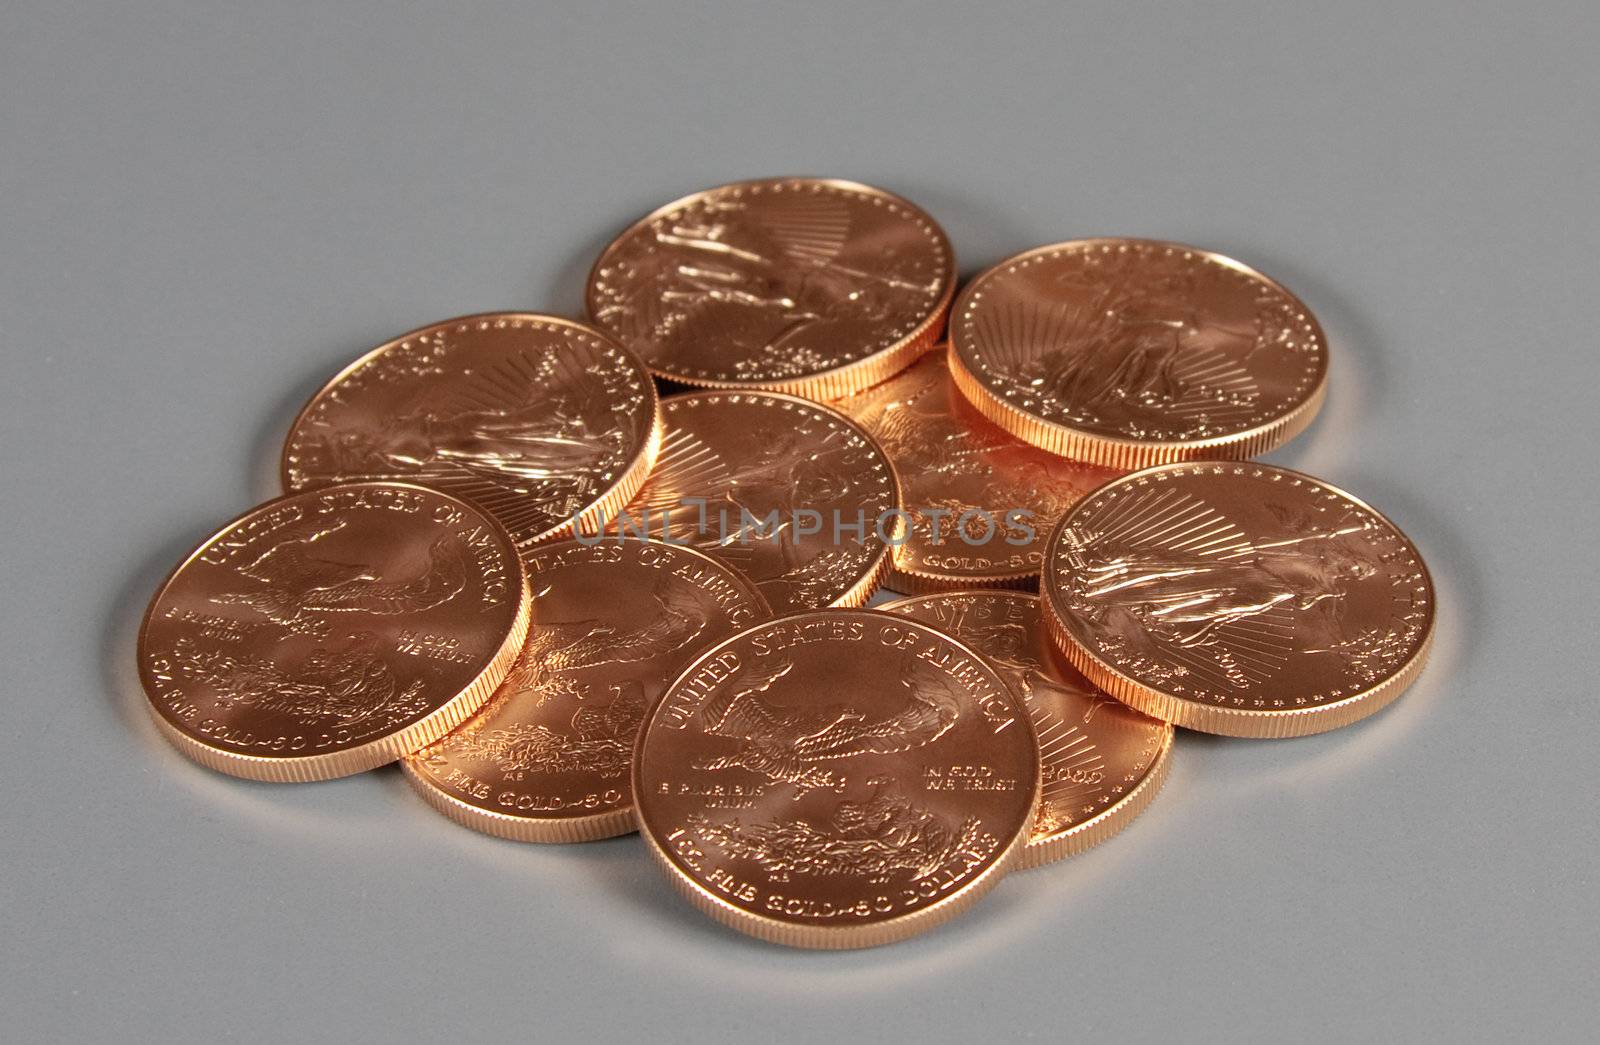 Stack of US Treasury 1 oz Eagle Gold Coins